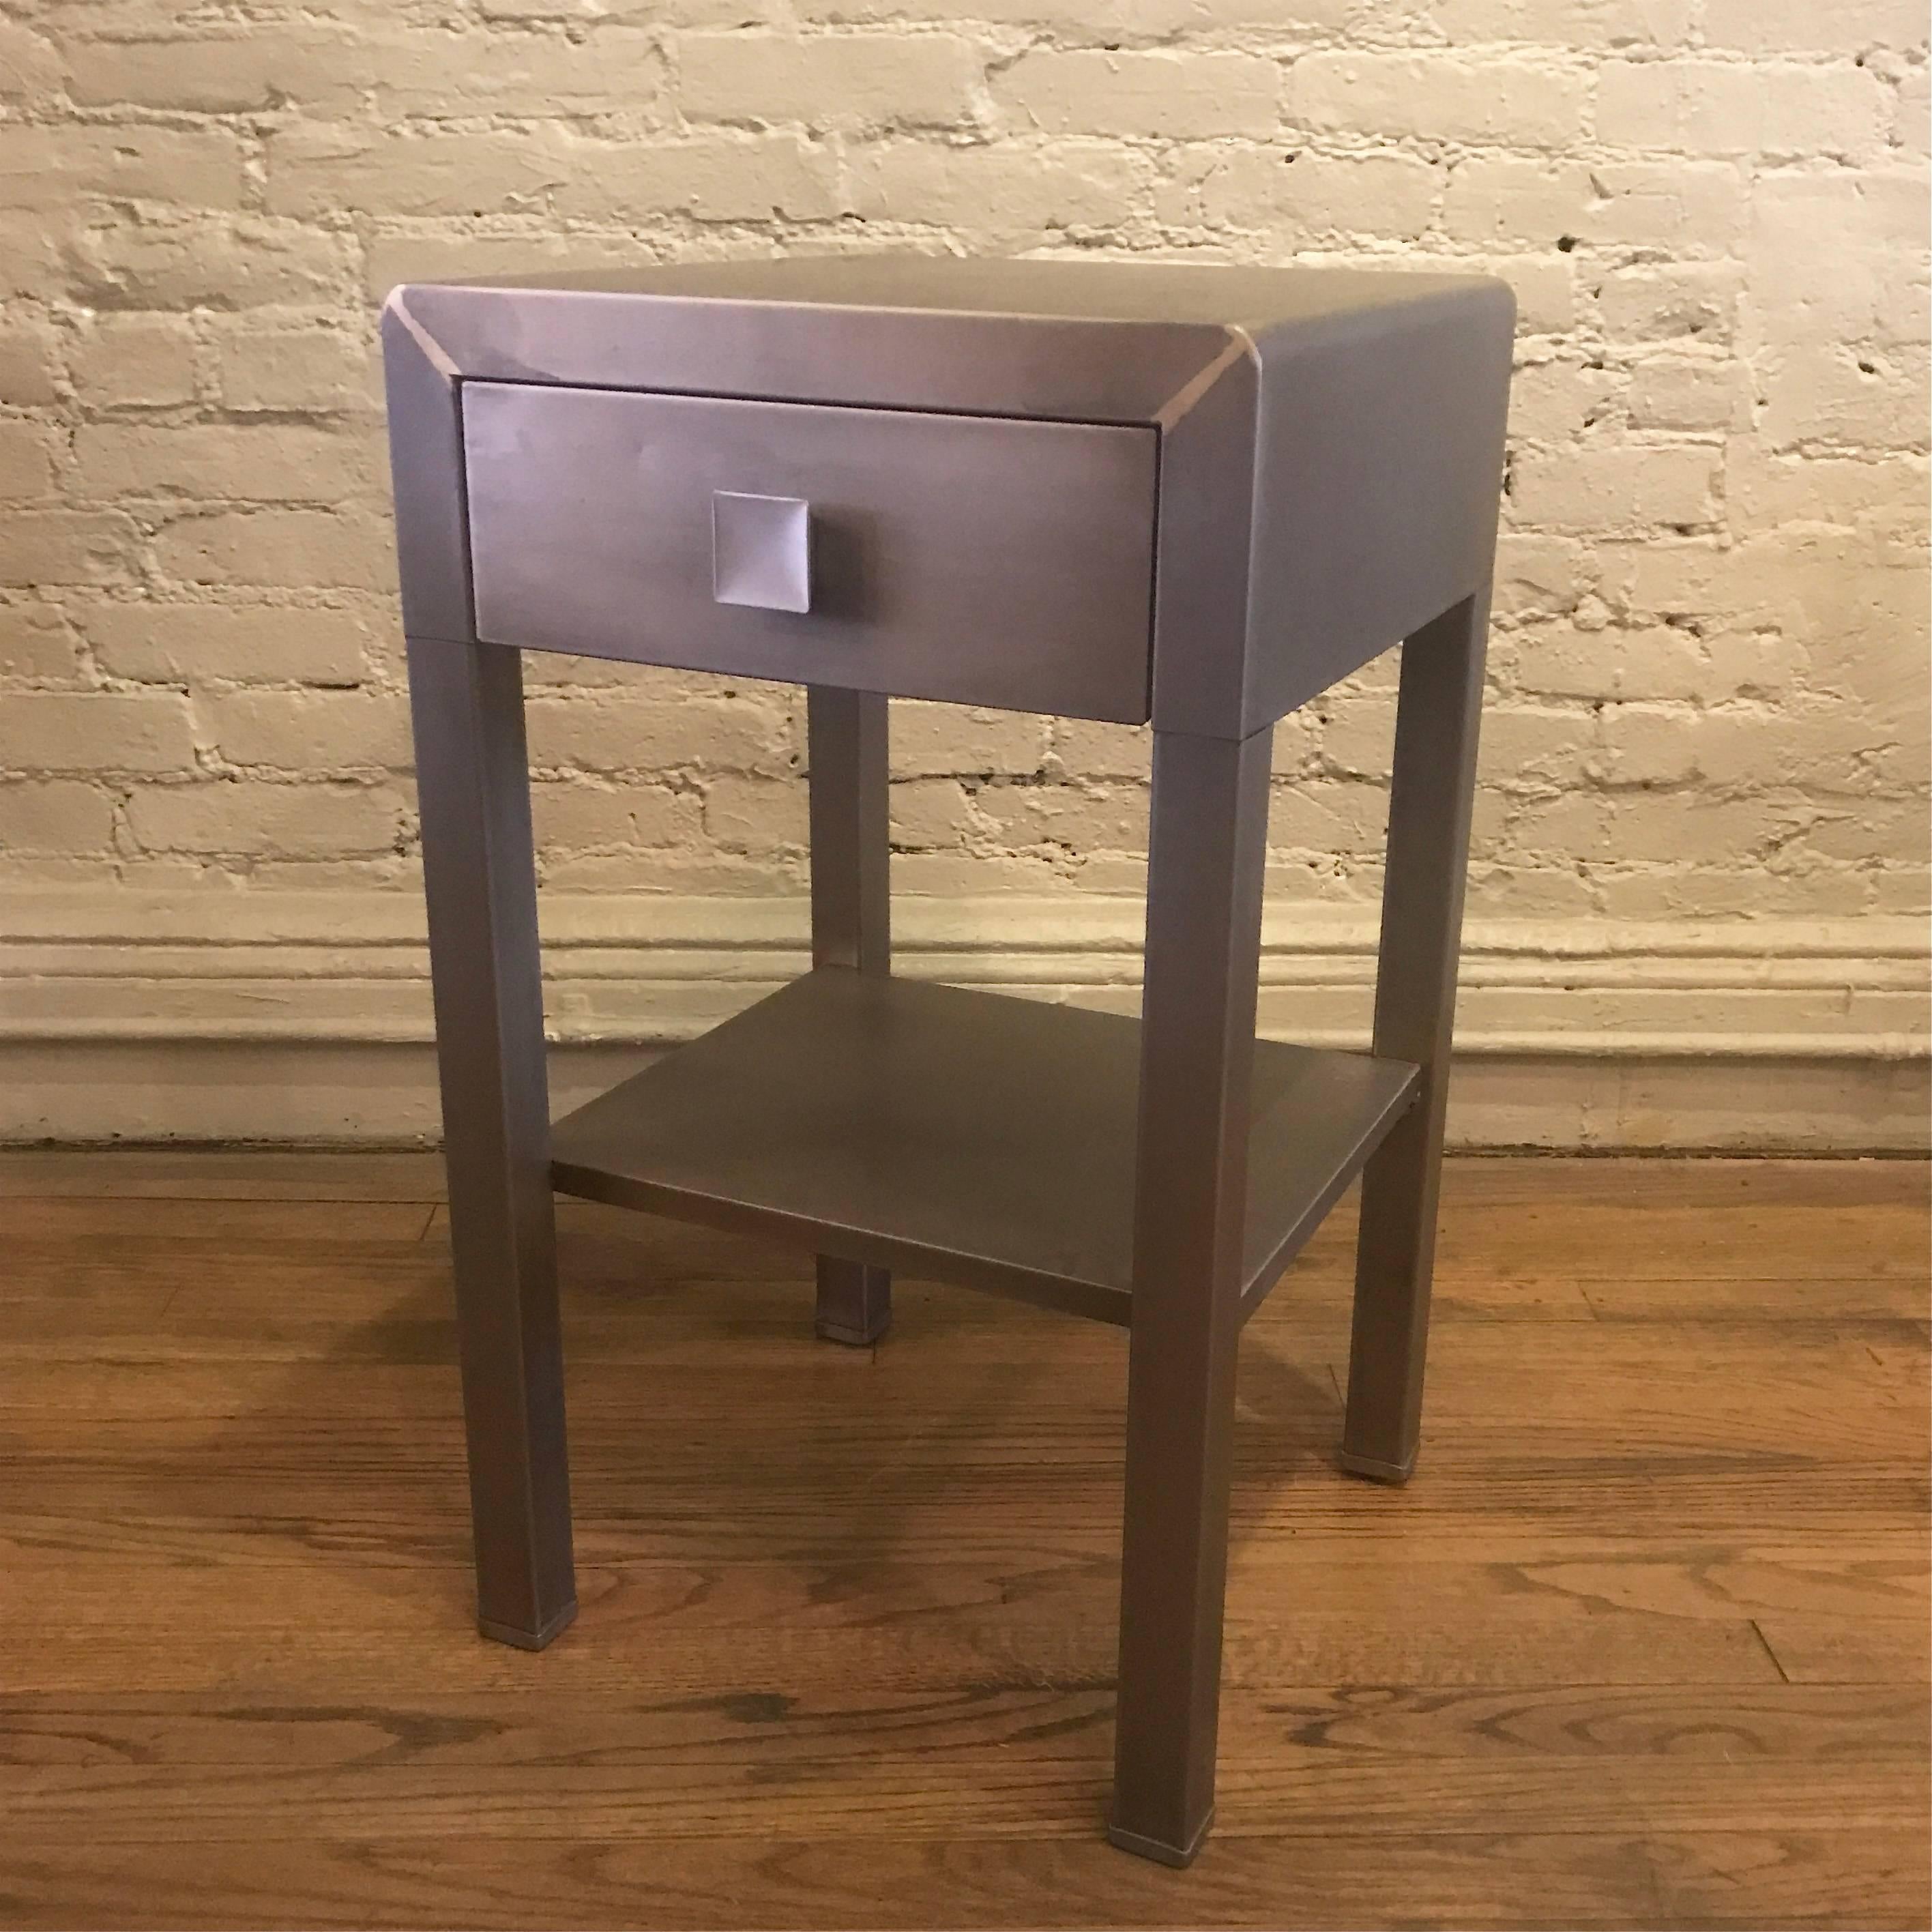 Art Deco, machine age, Industrial side table or nightstand designed by Norman Bel Geddes for Simmons Furniture Company is newly restored in a brushed steel finish.